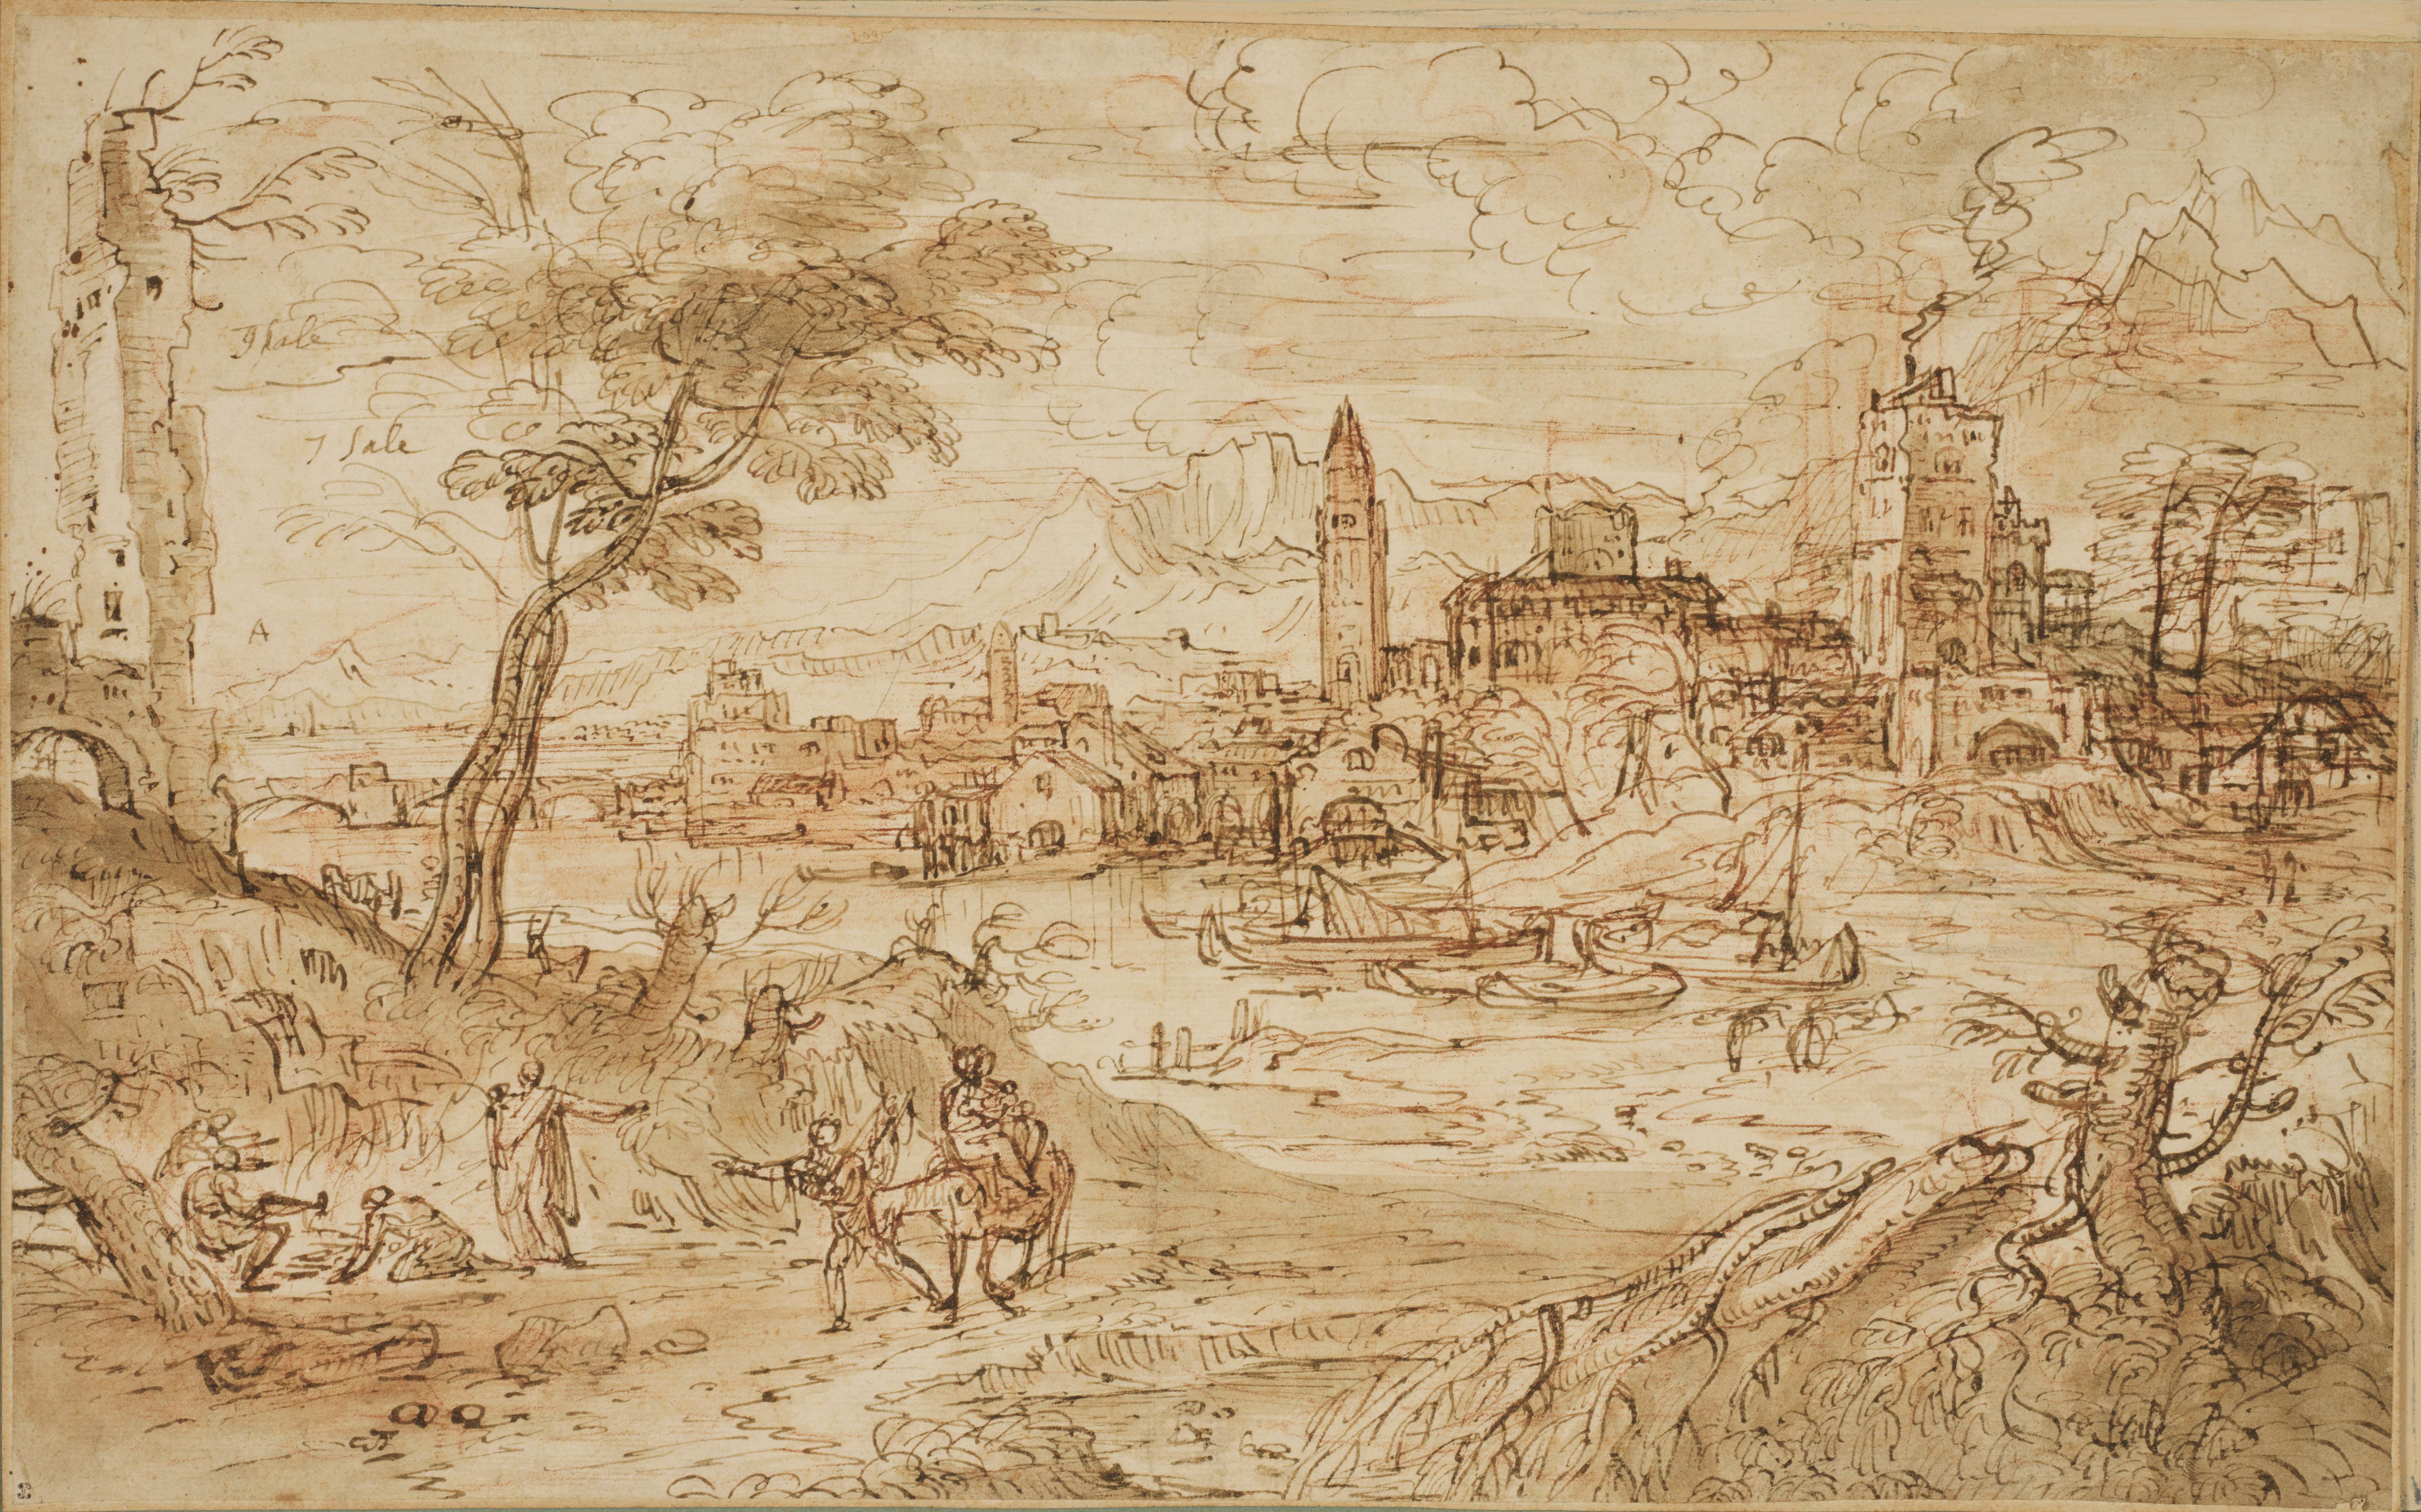 Flemish School, 17th Century Landscape Art - A large landscape drawing executed in Italy around 1630 by a Flemish artist